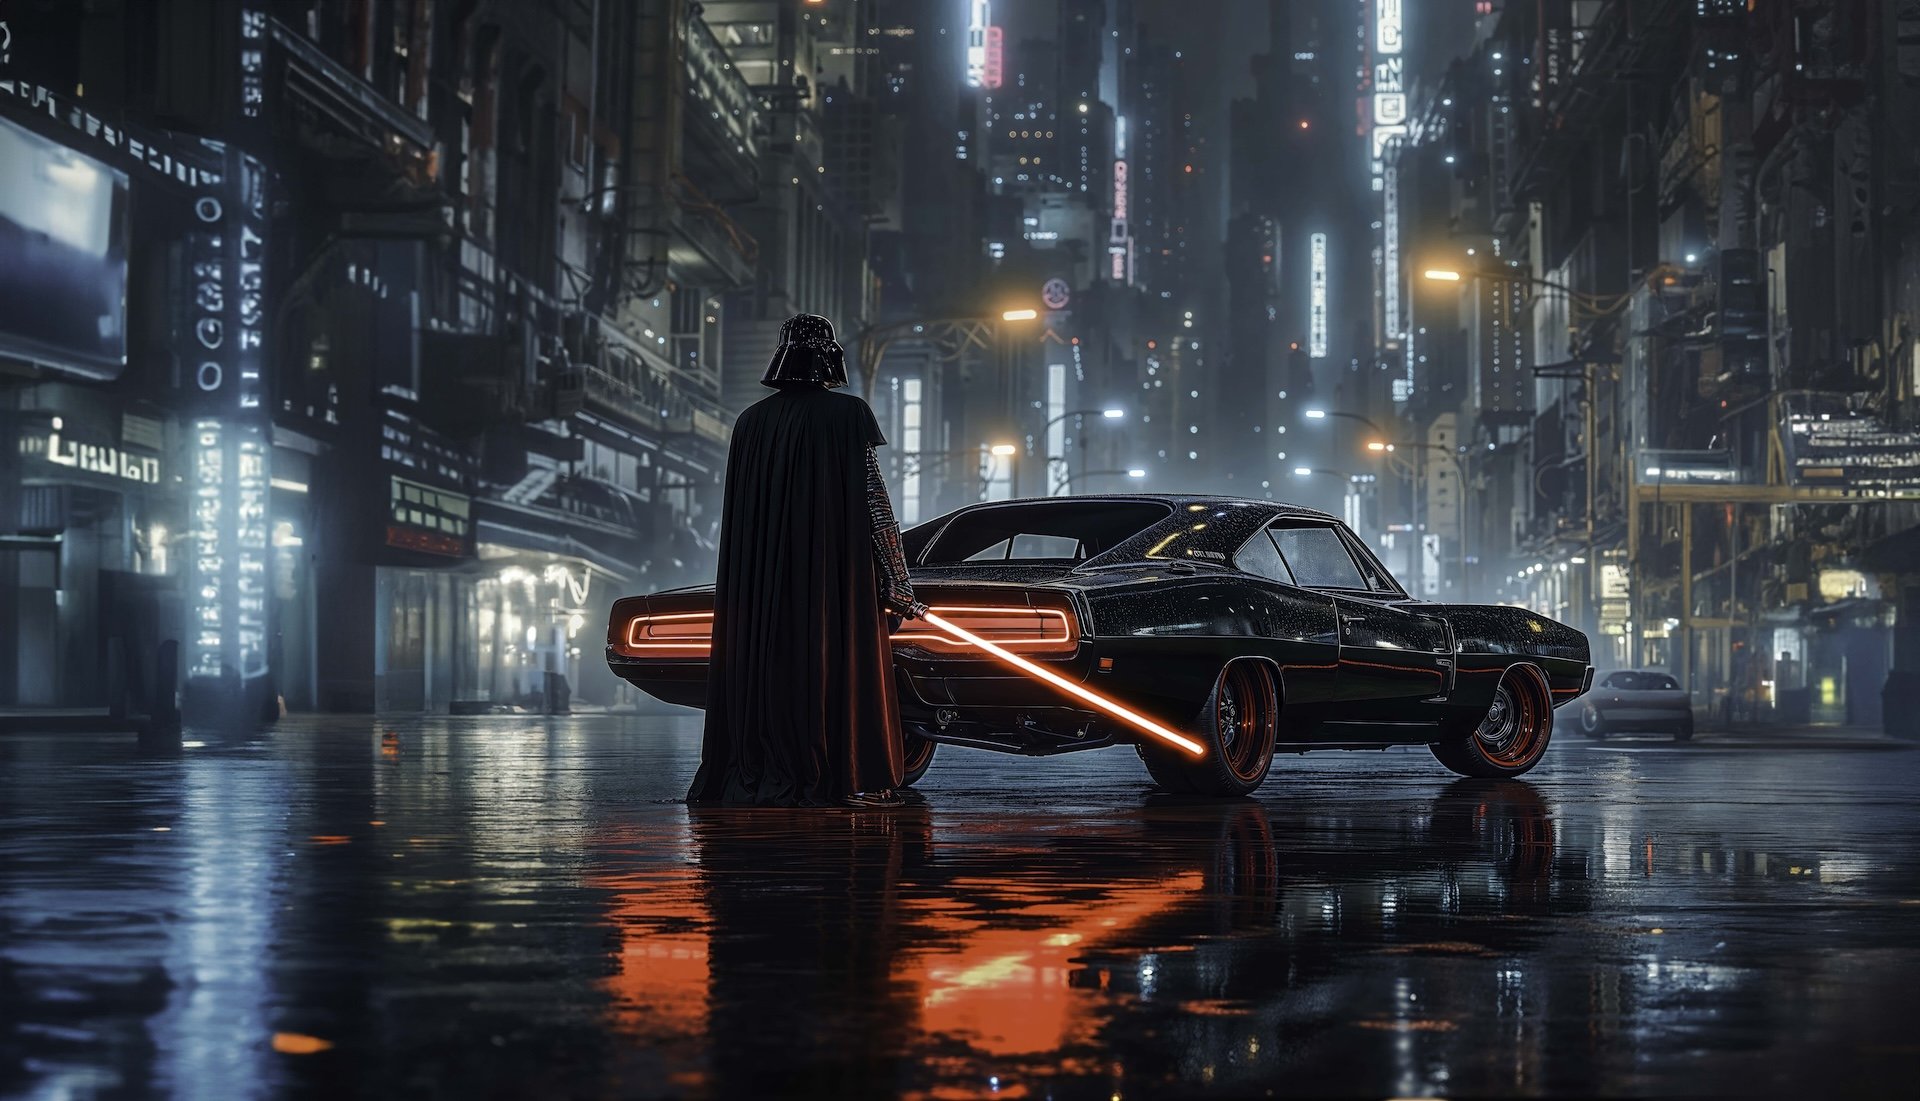 Darth Charger